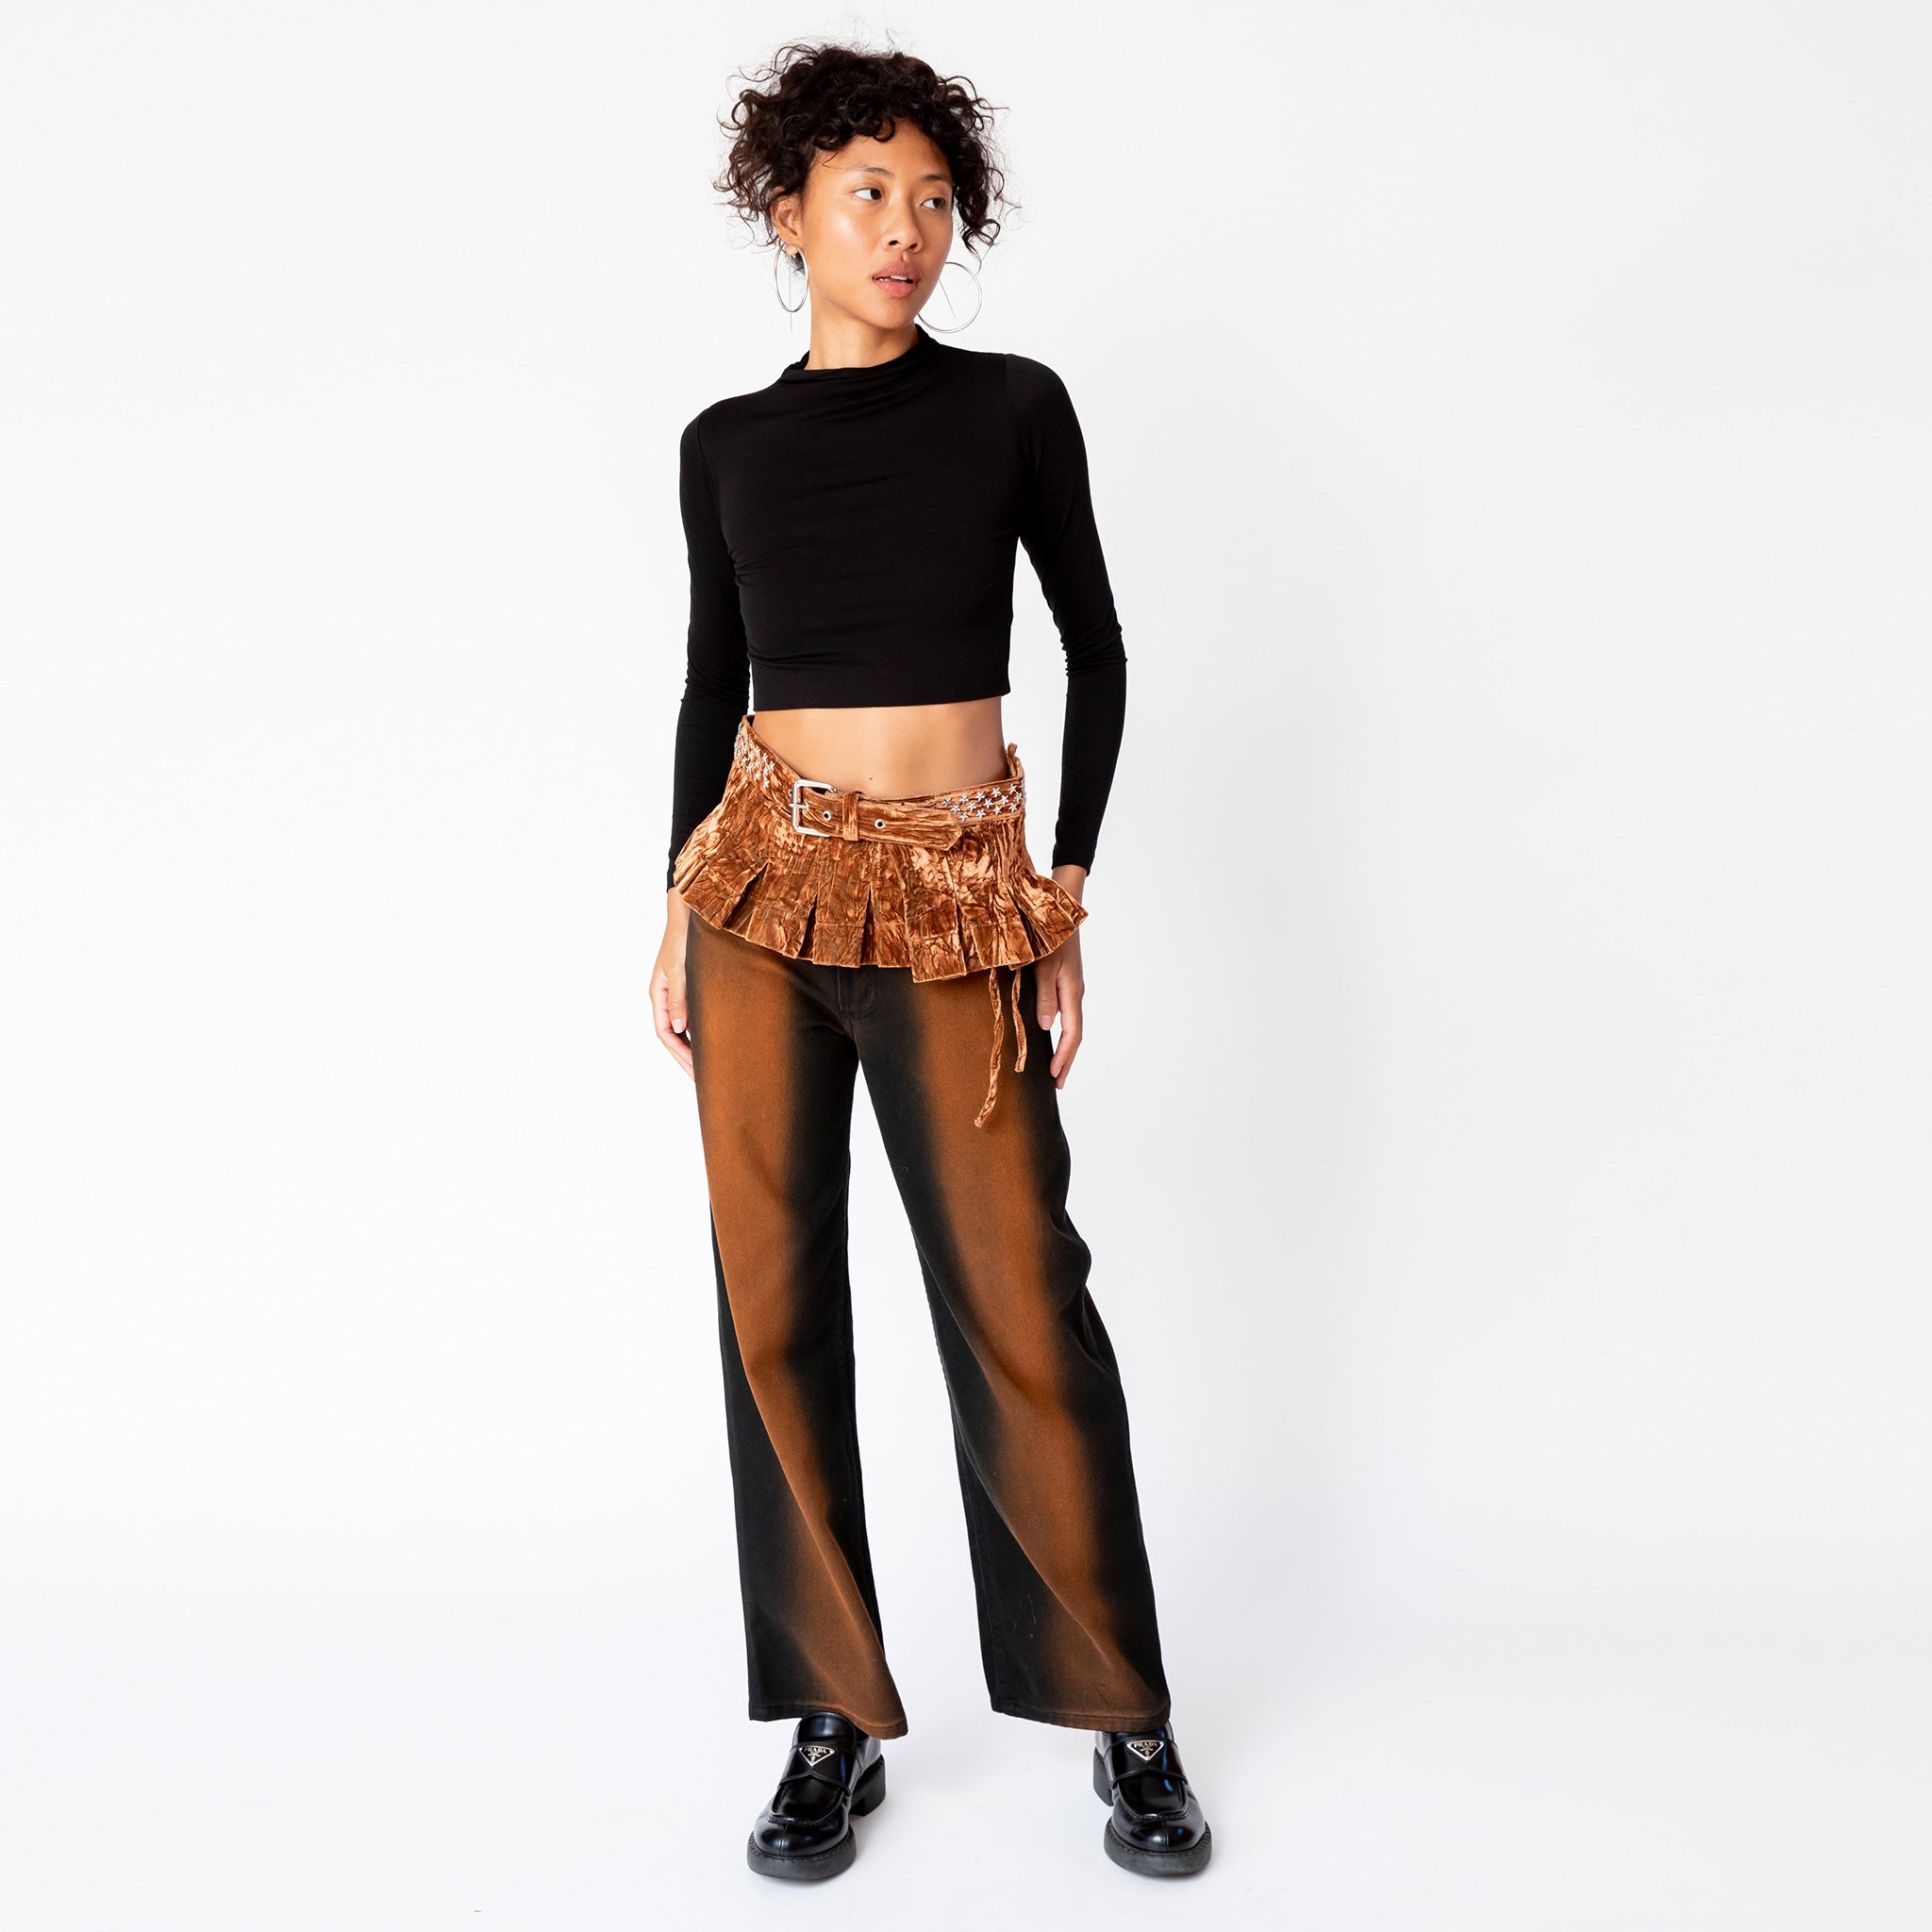 Full outfit view of a model wearing the longsleeved black crop Mockneck top paired with brown and black gradient jeans and a velvet pleated belt.